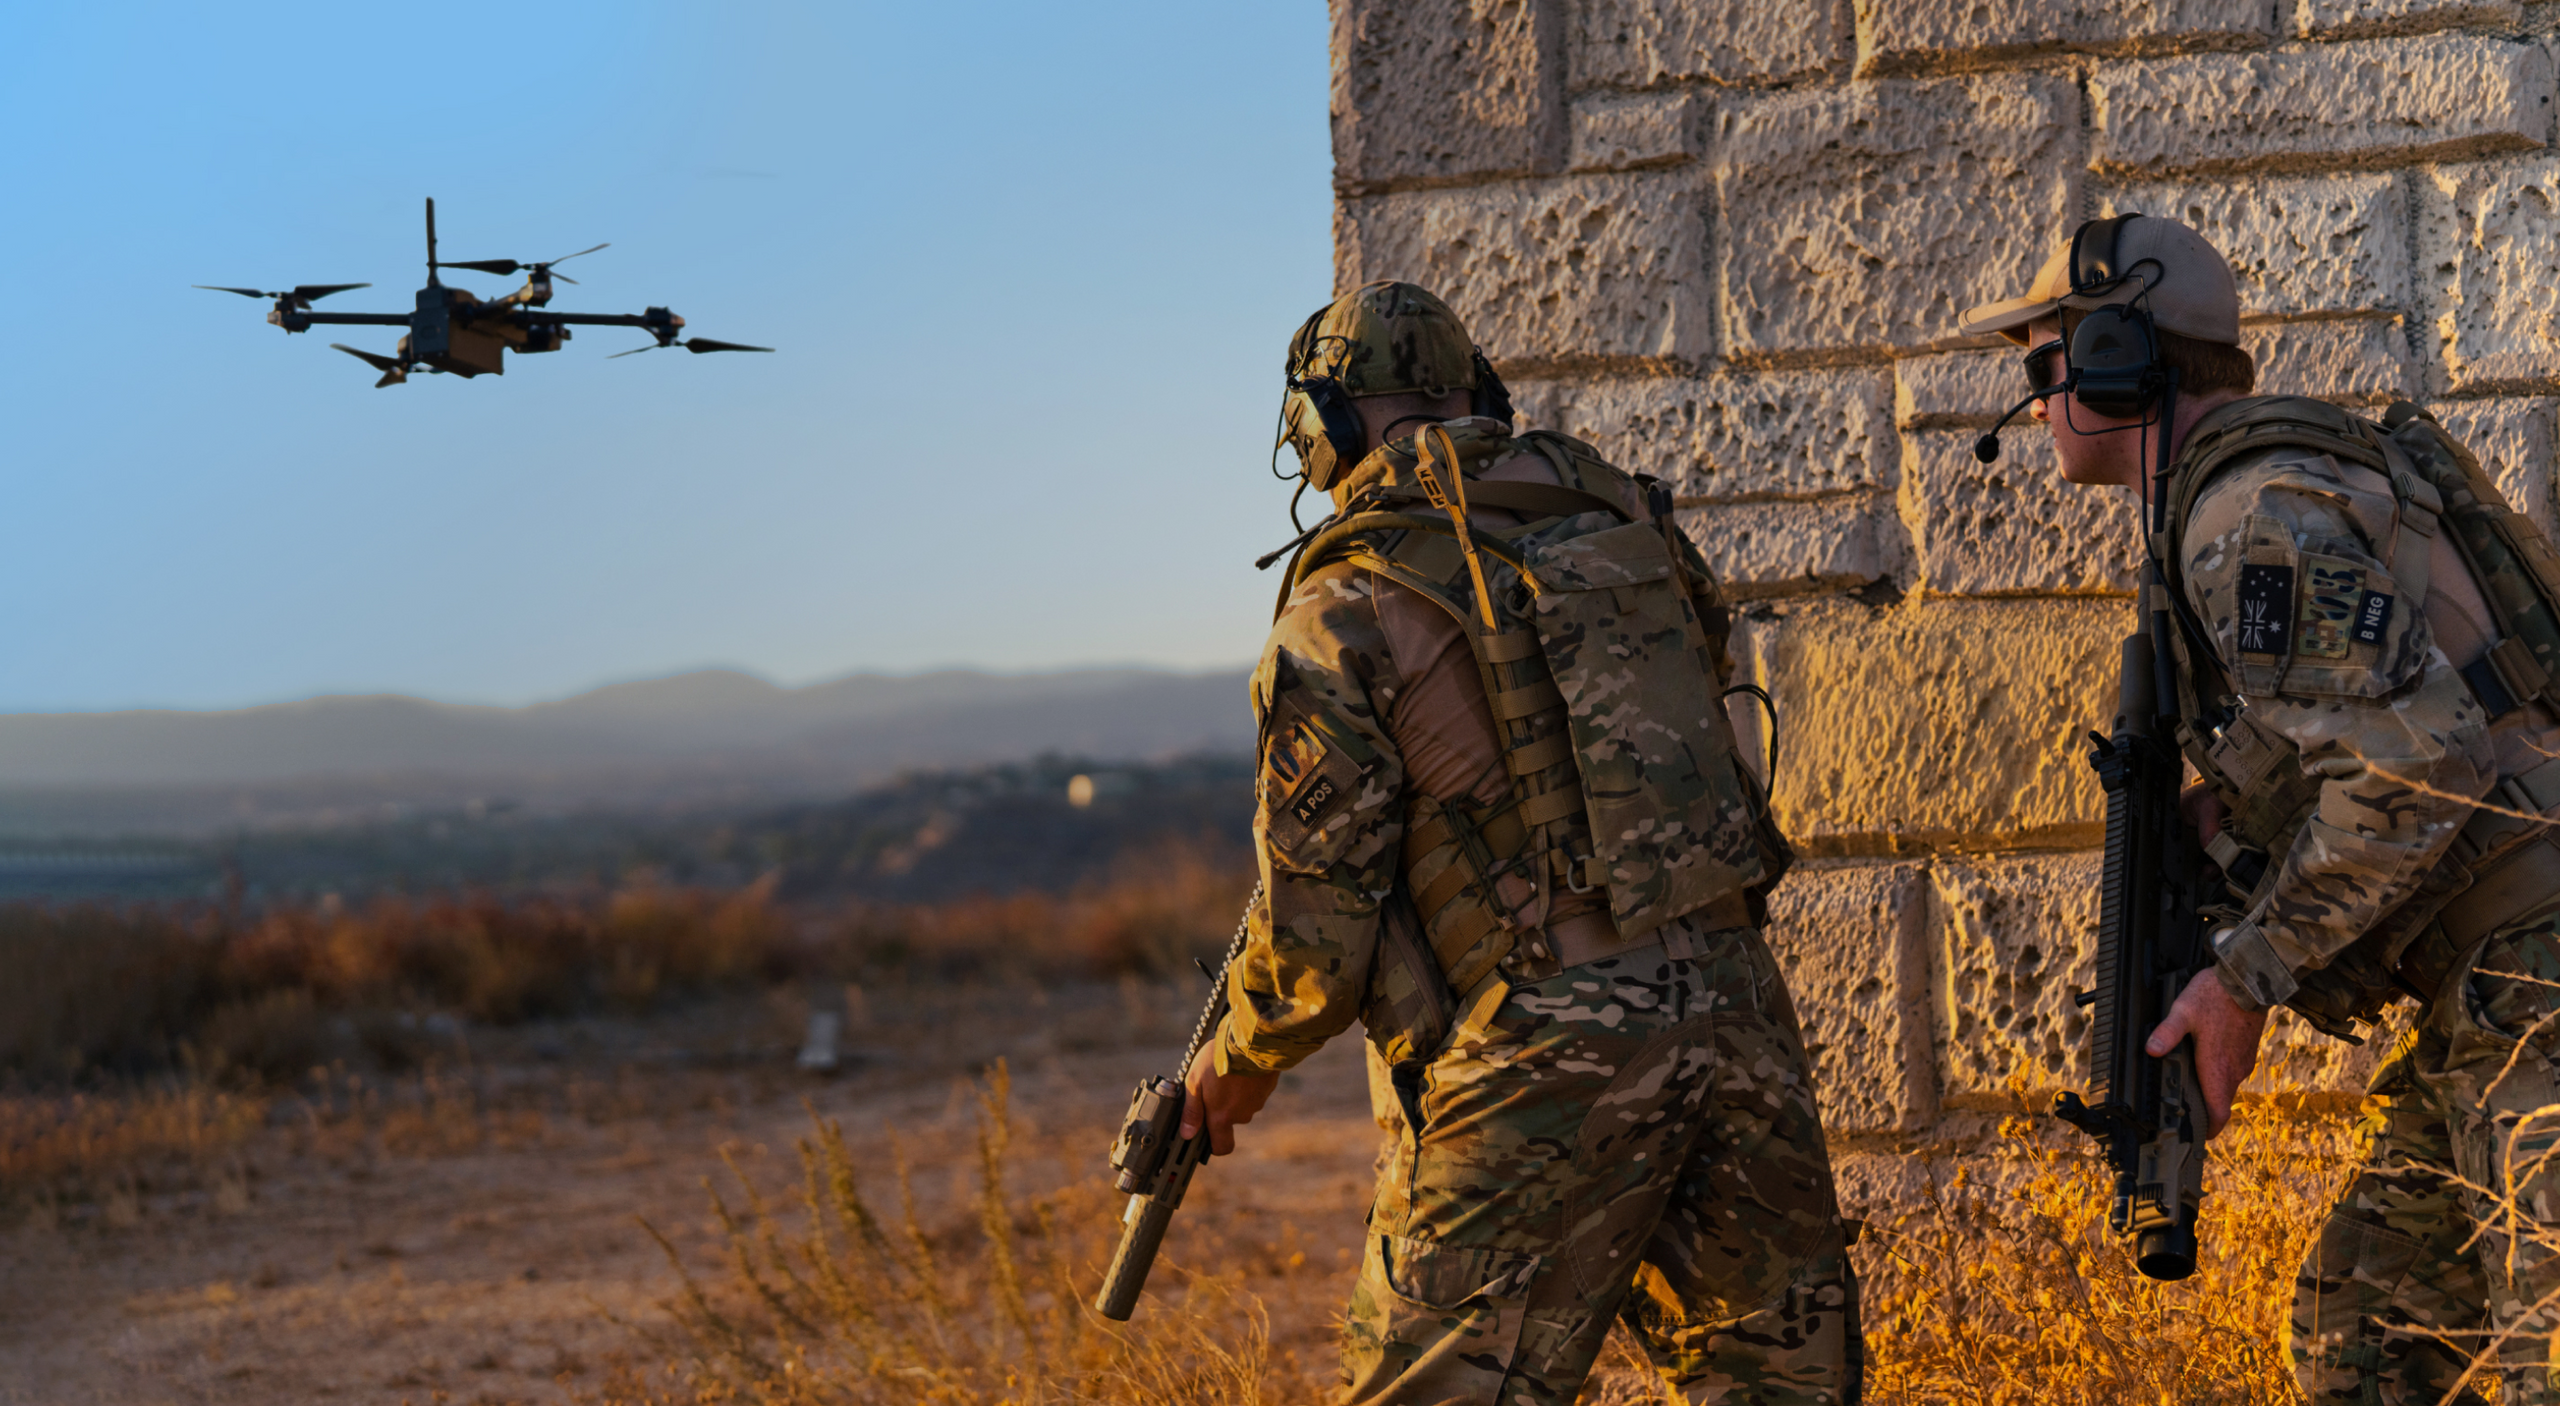 drone being used for reconnaissance